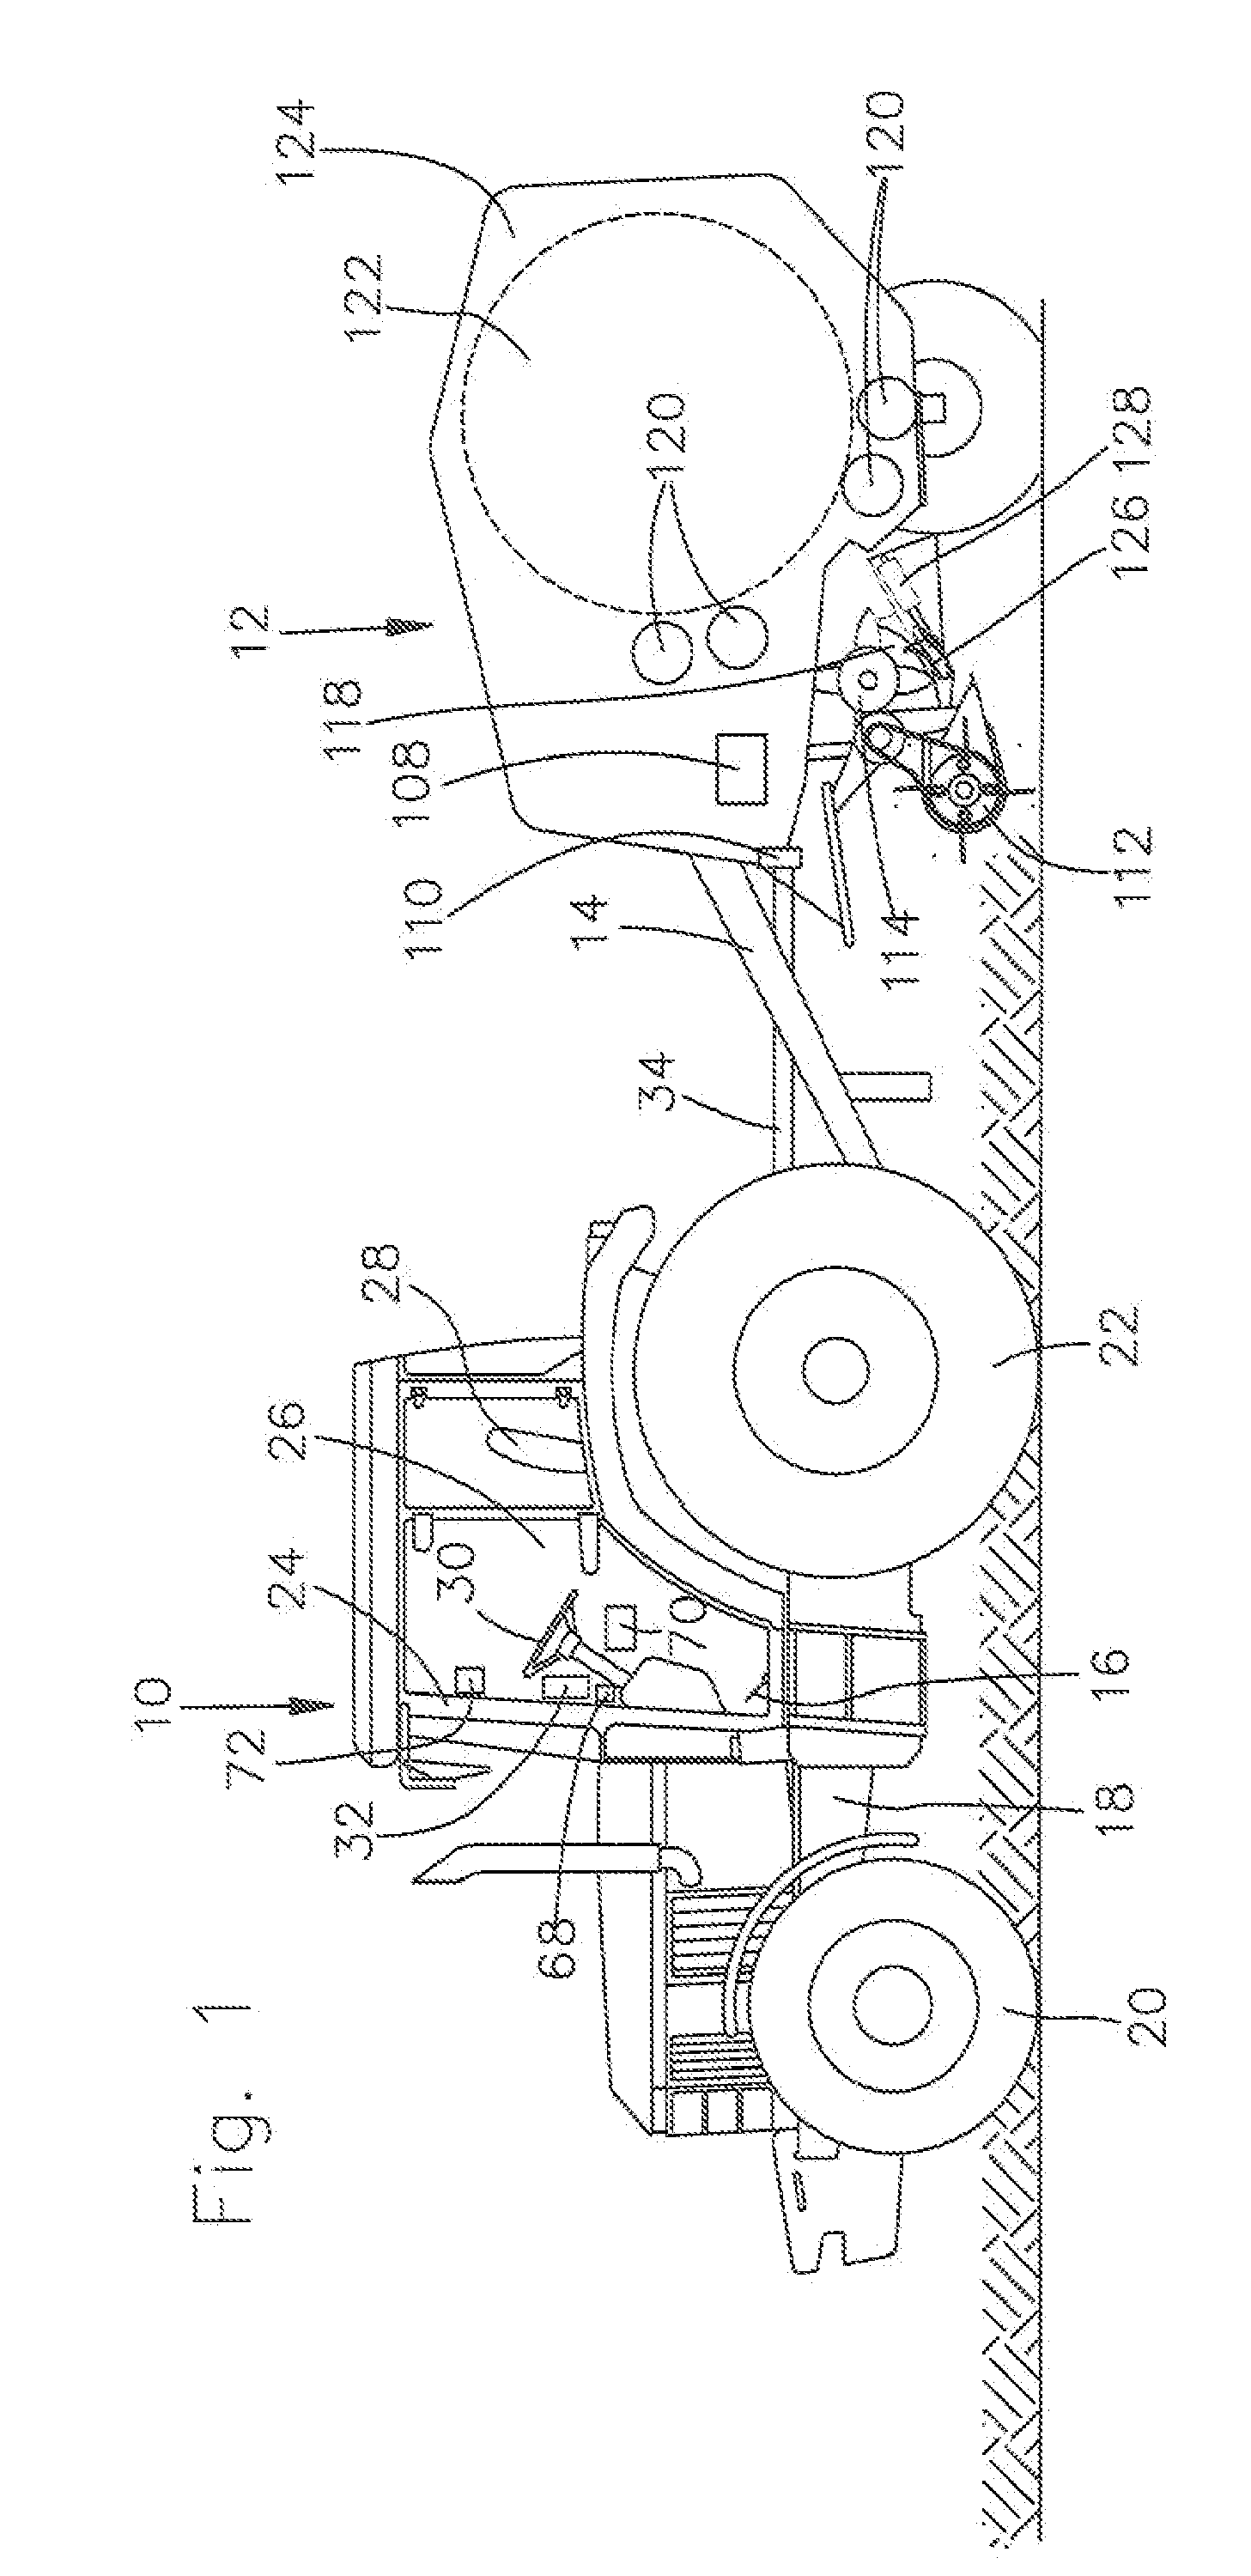 Drive Arrangement And Process For The Drive Of An Agricultural Implement